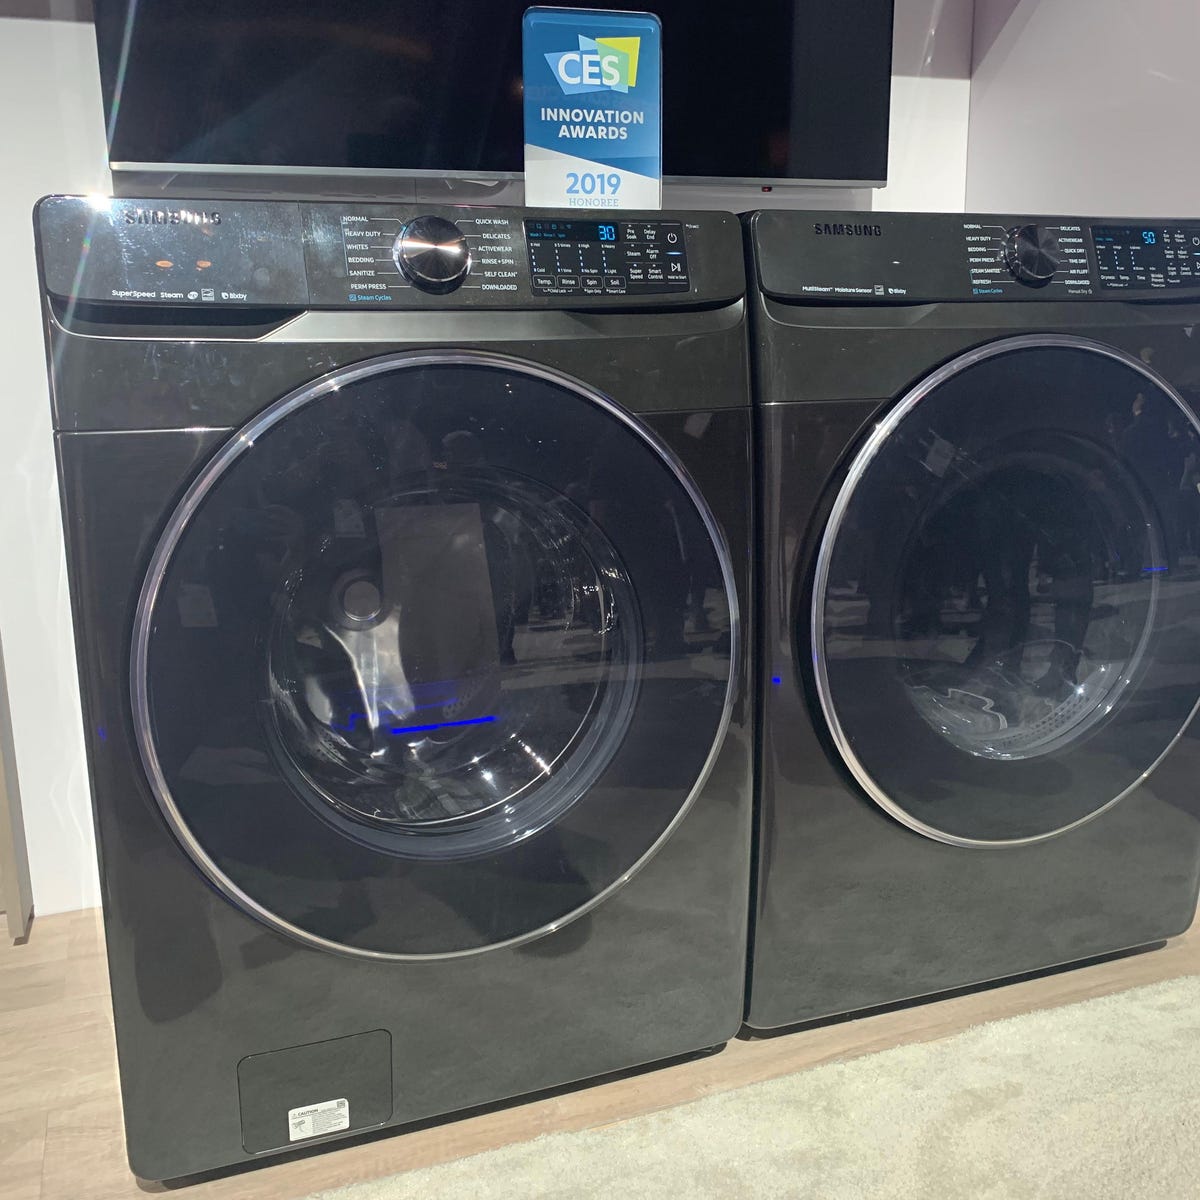 Samsung's smart washer/dryer lets you pick when you want the cycle to end -  CNET